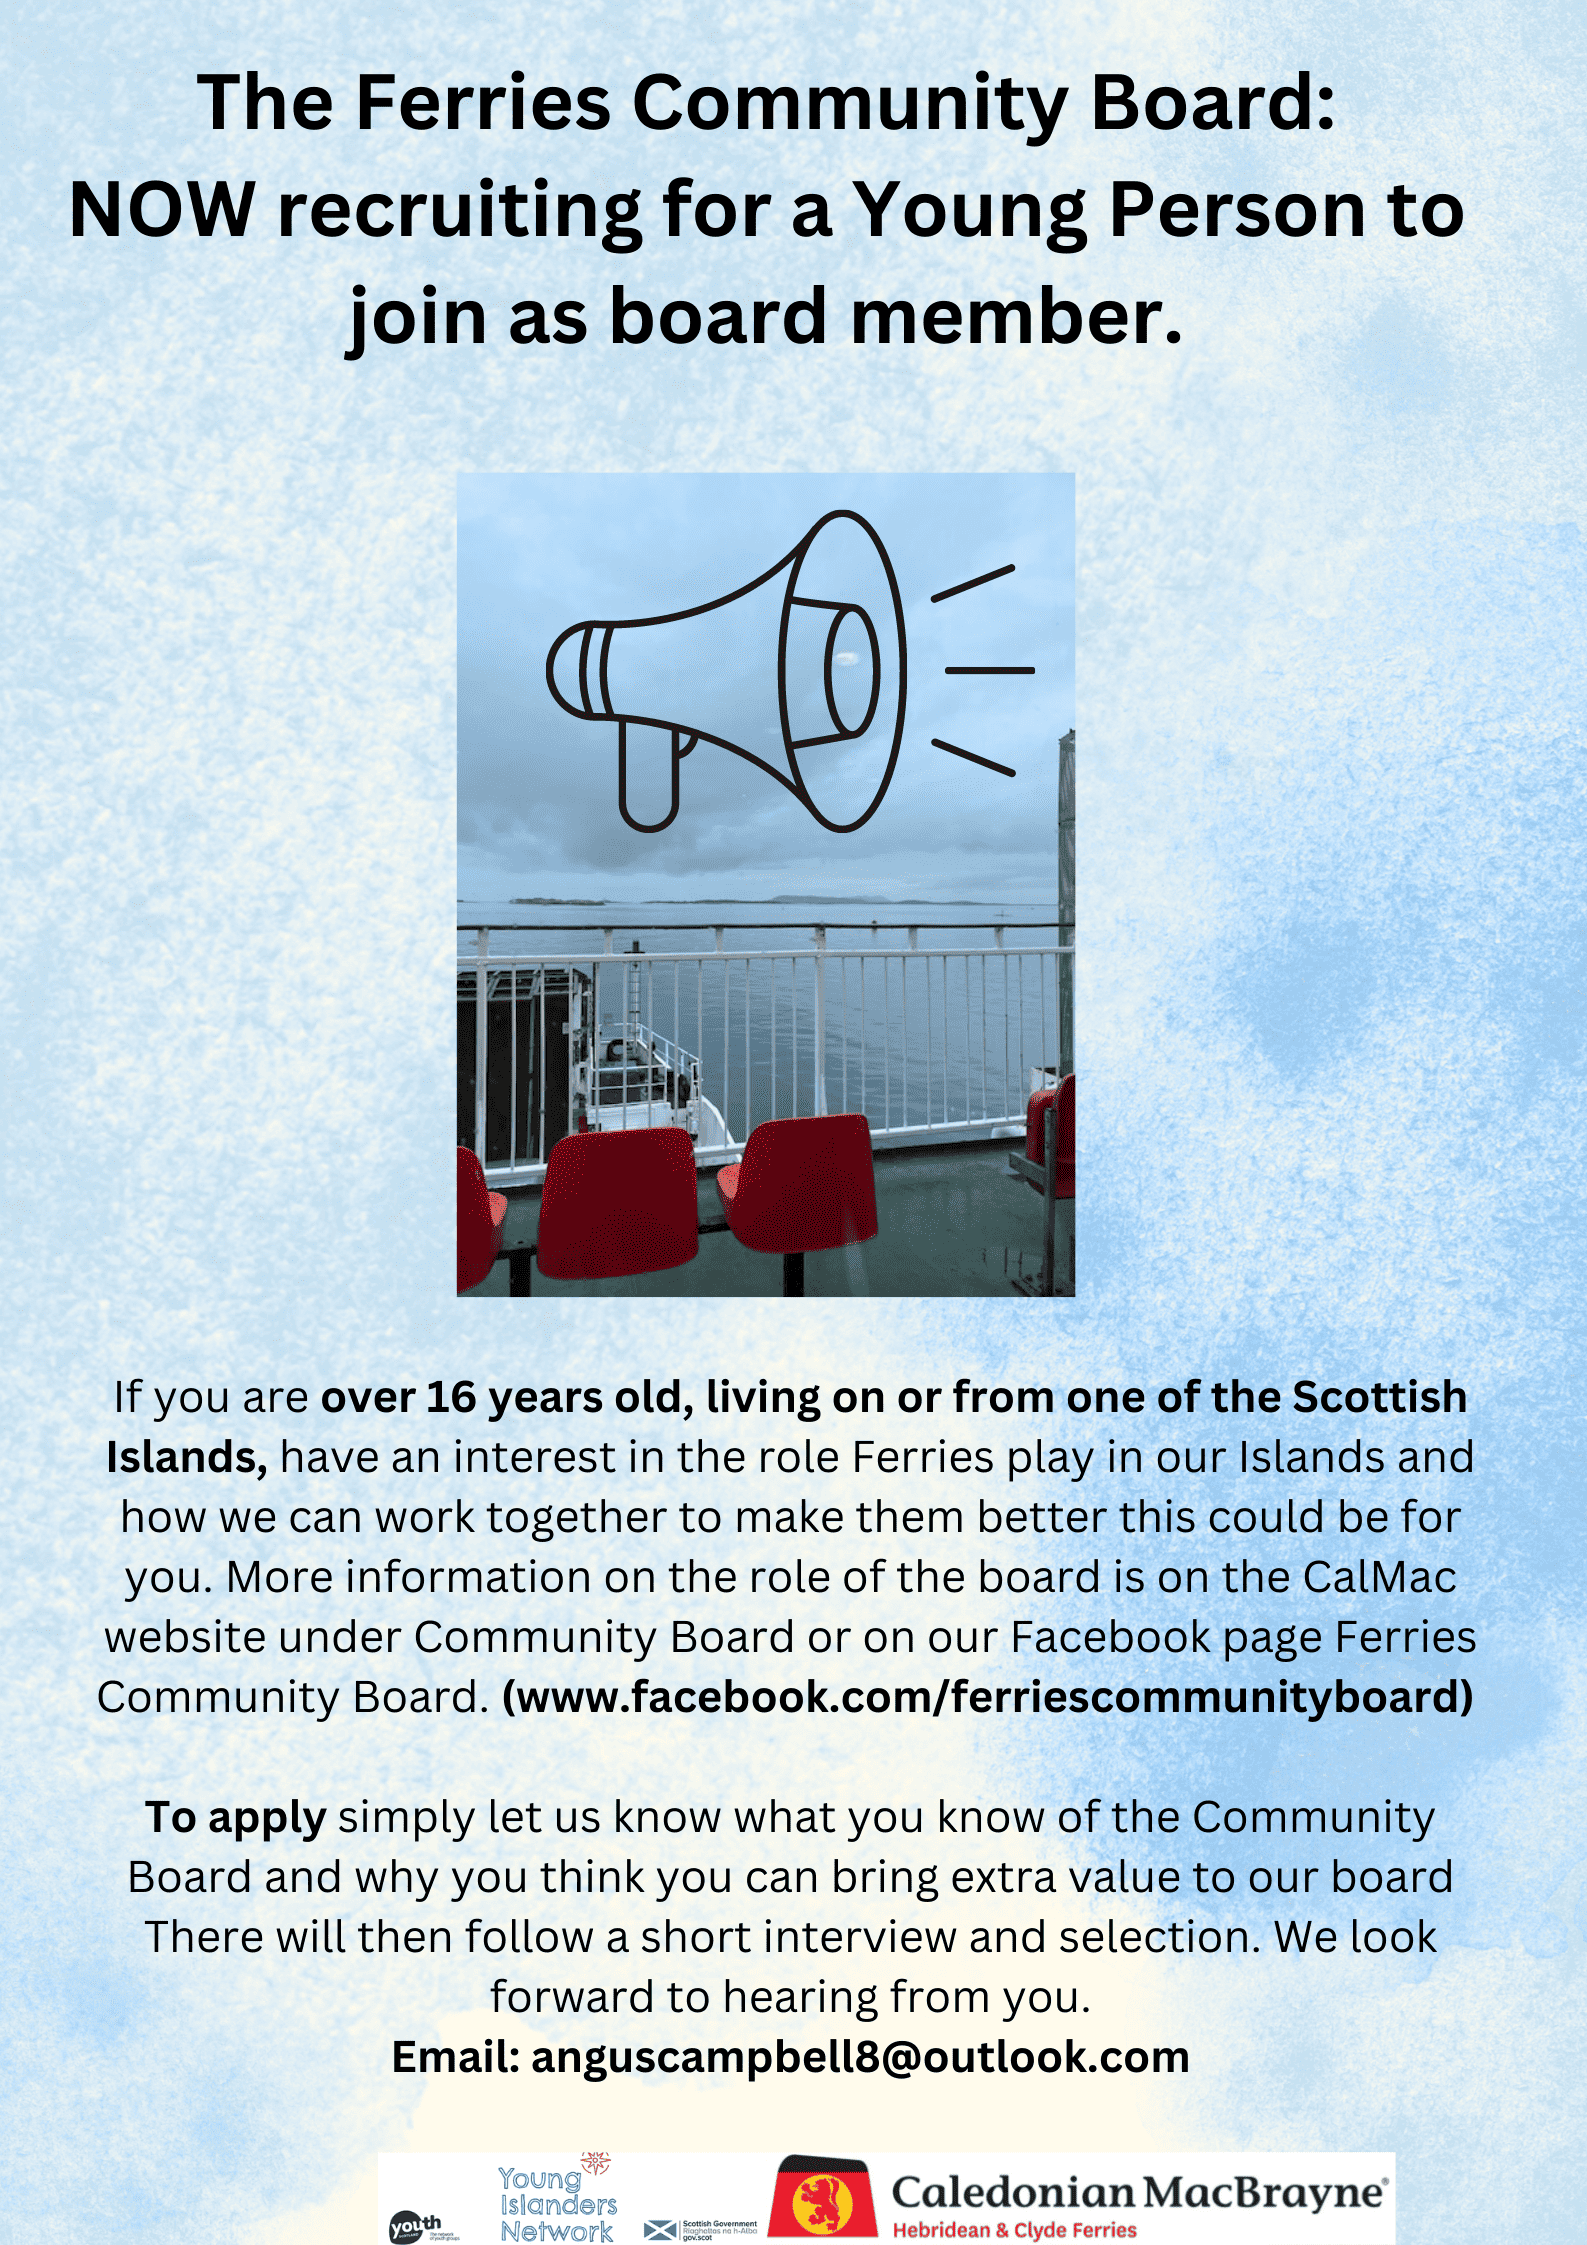 Young Islanders, the Ferry Communities Board is looking for YOU to come aboard!